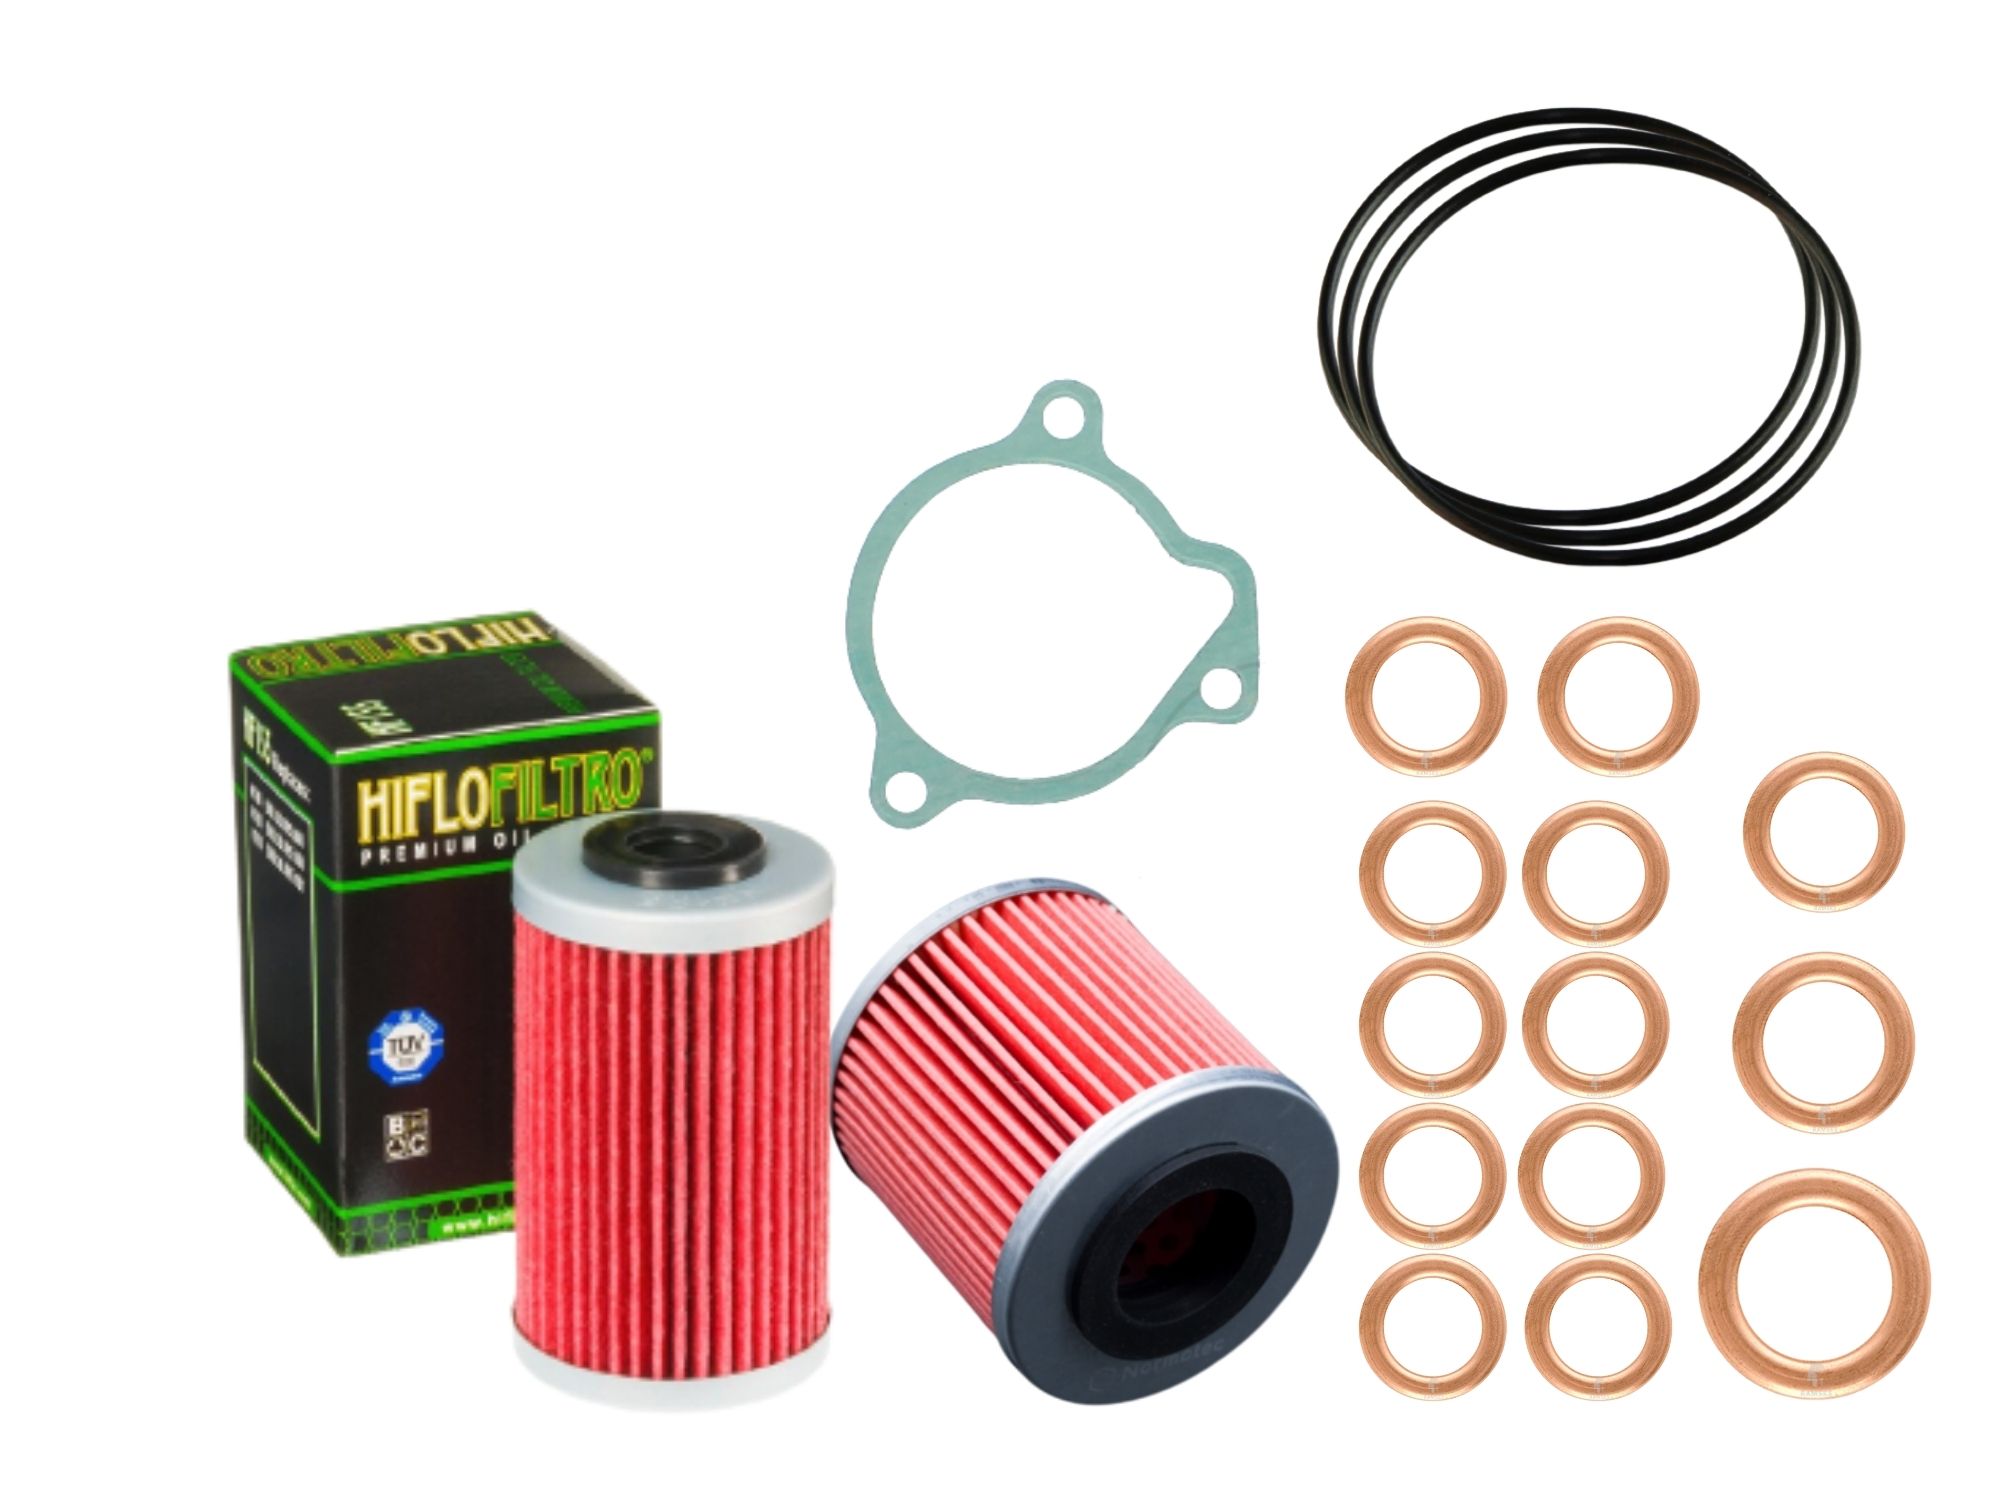 Oil filter kit suitable for KTM 400 540 620 LC4 SC SXC with micro filter